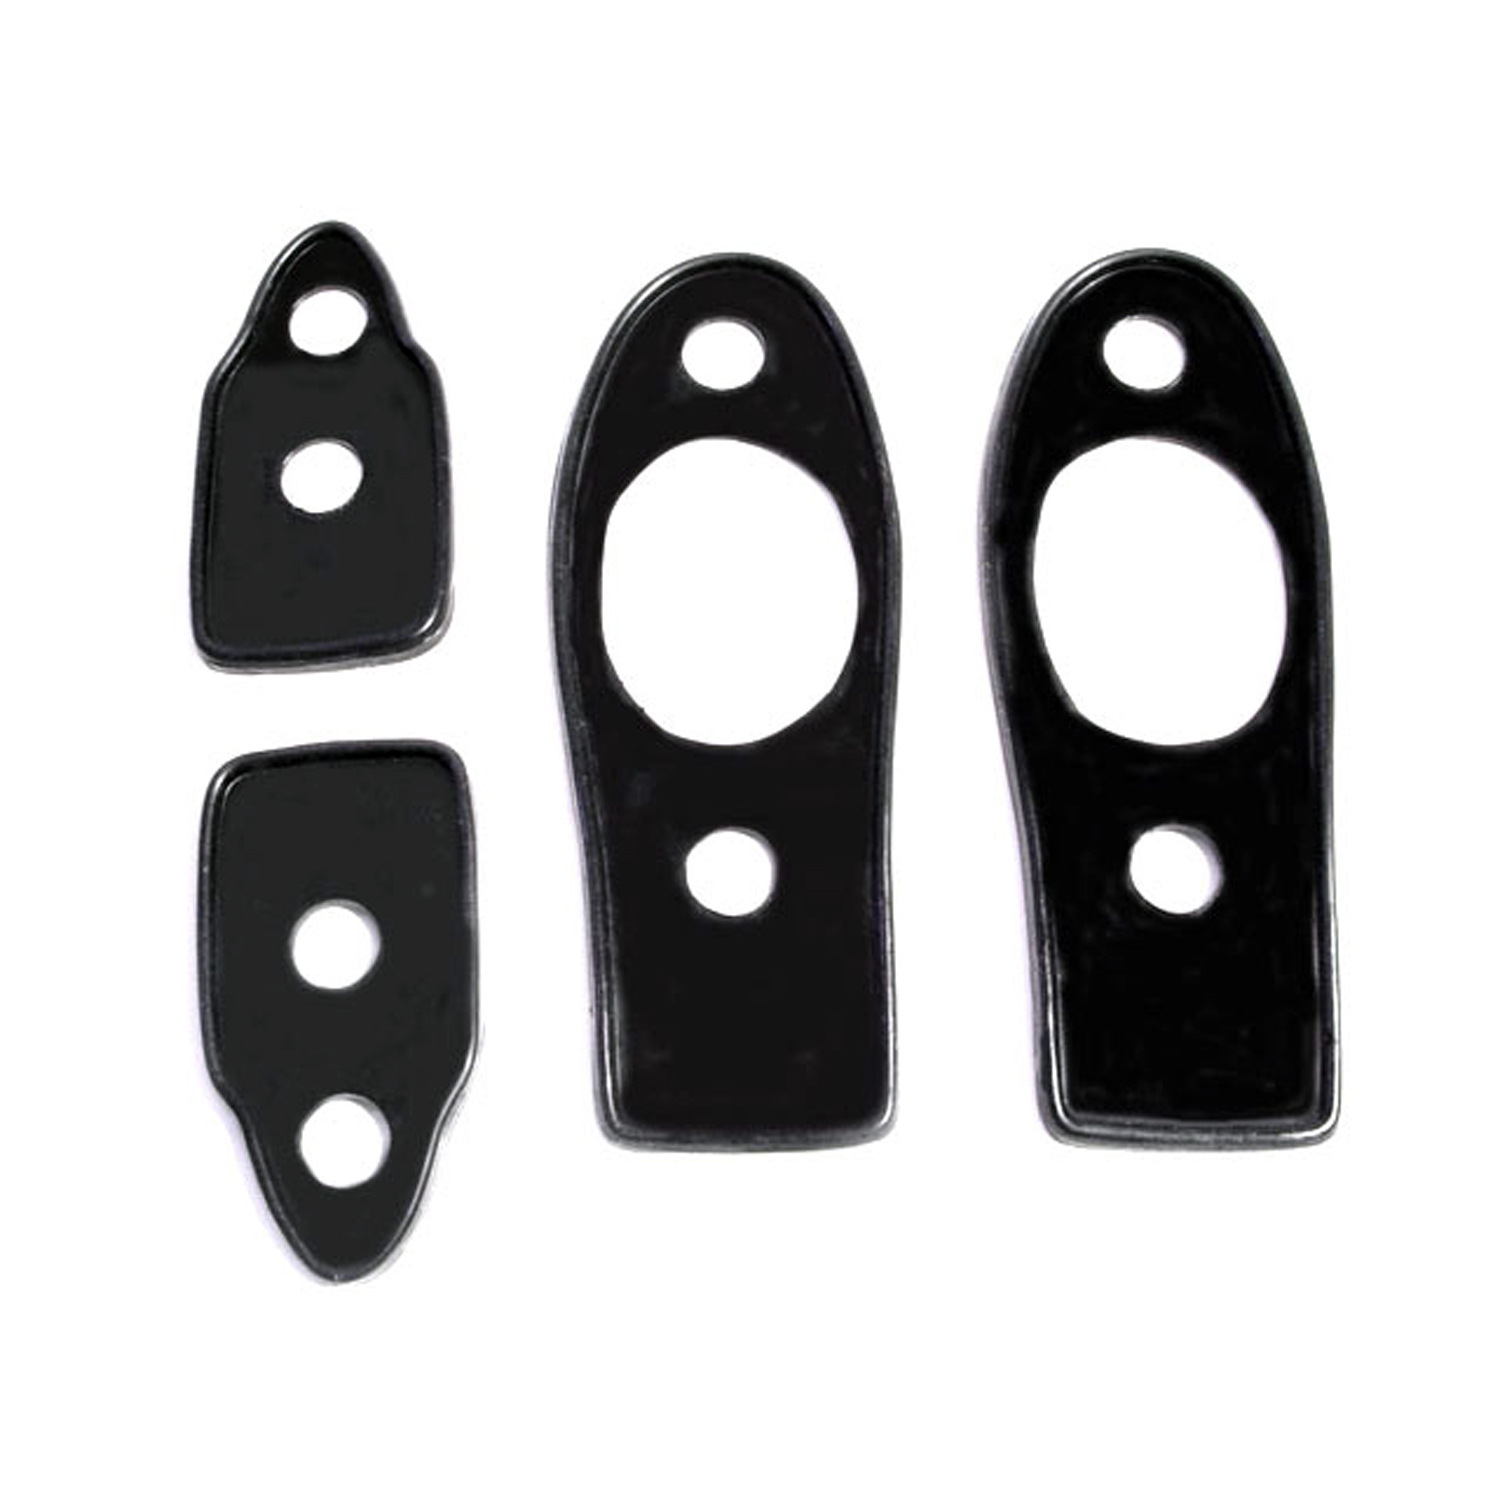 1936 Cord 810 Trunk Hinge Pads.  1-5/8 wide X 6-7/8 long.  4-Piece Set-MP 478